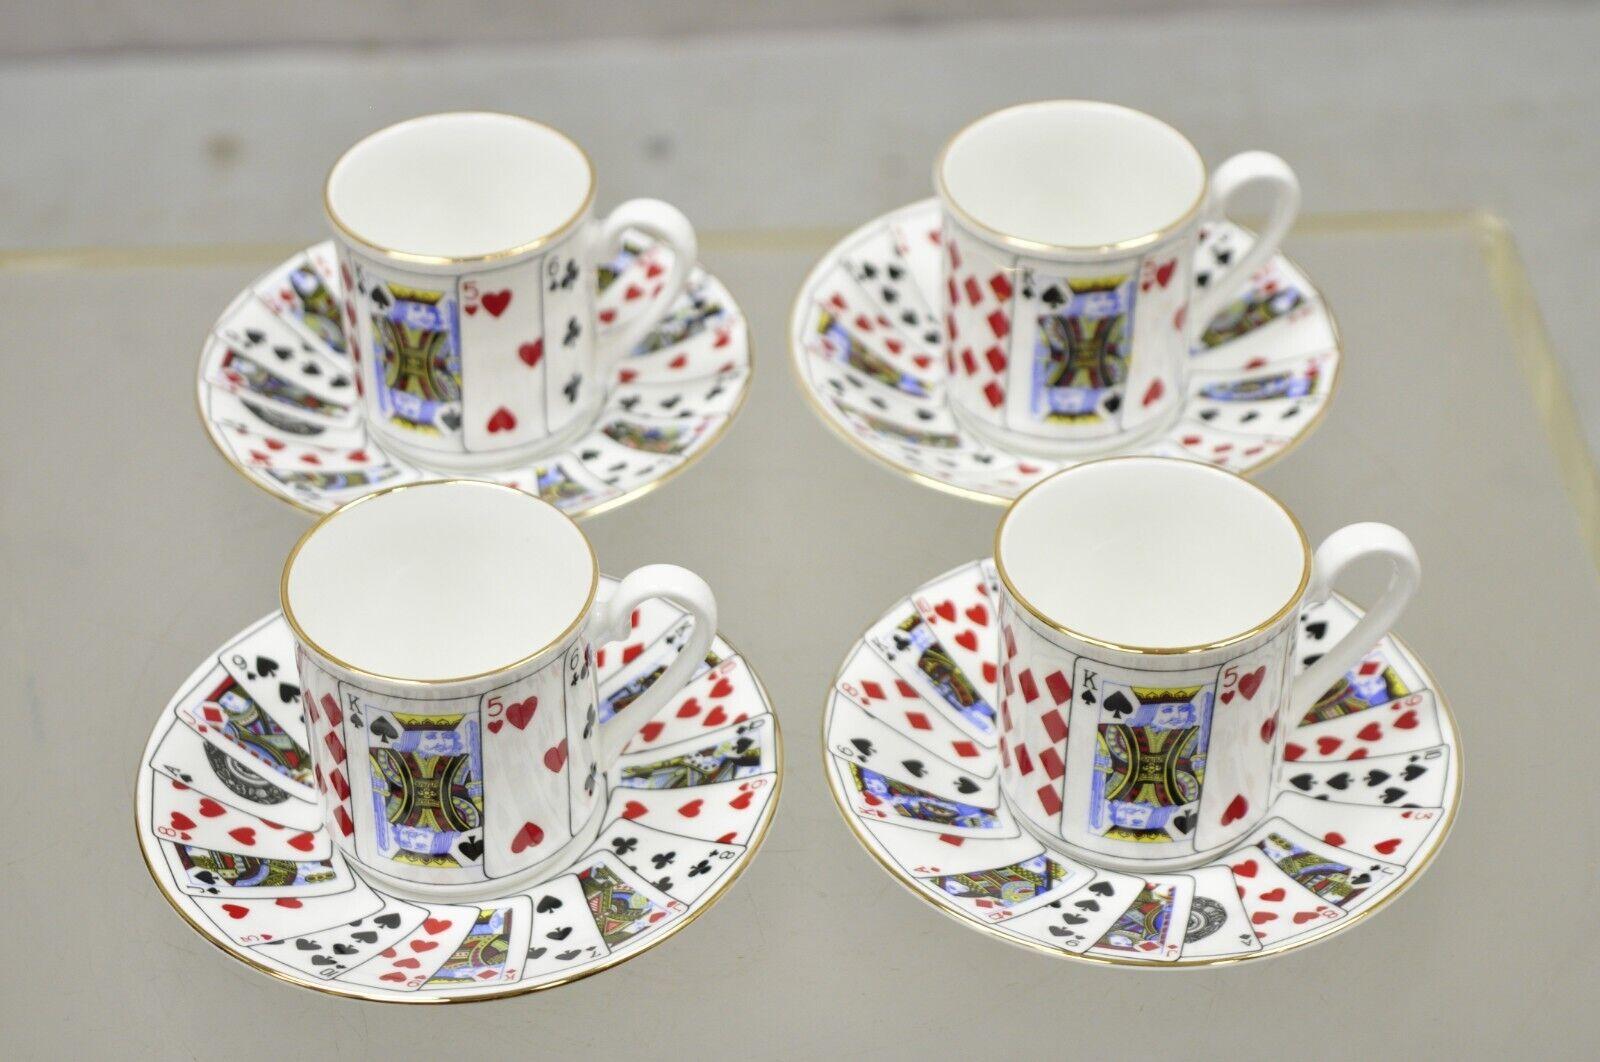 Tiffany & Co Staffordshire Playing Cards Demitasse Tea Cup & Saucer, Set of 4 2